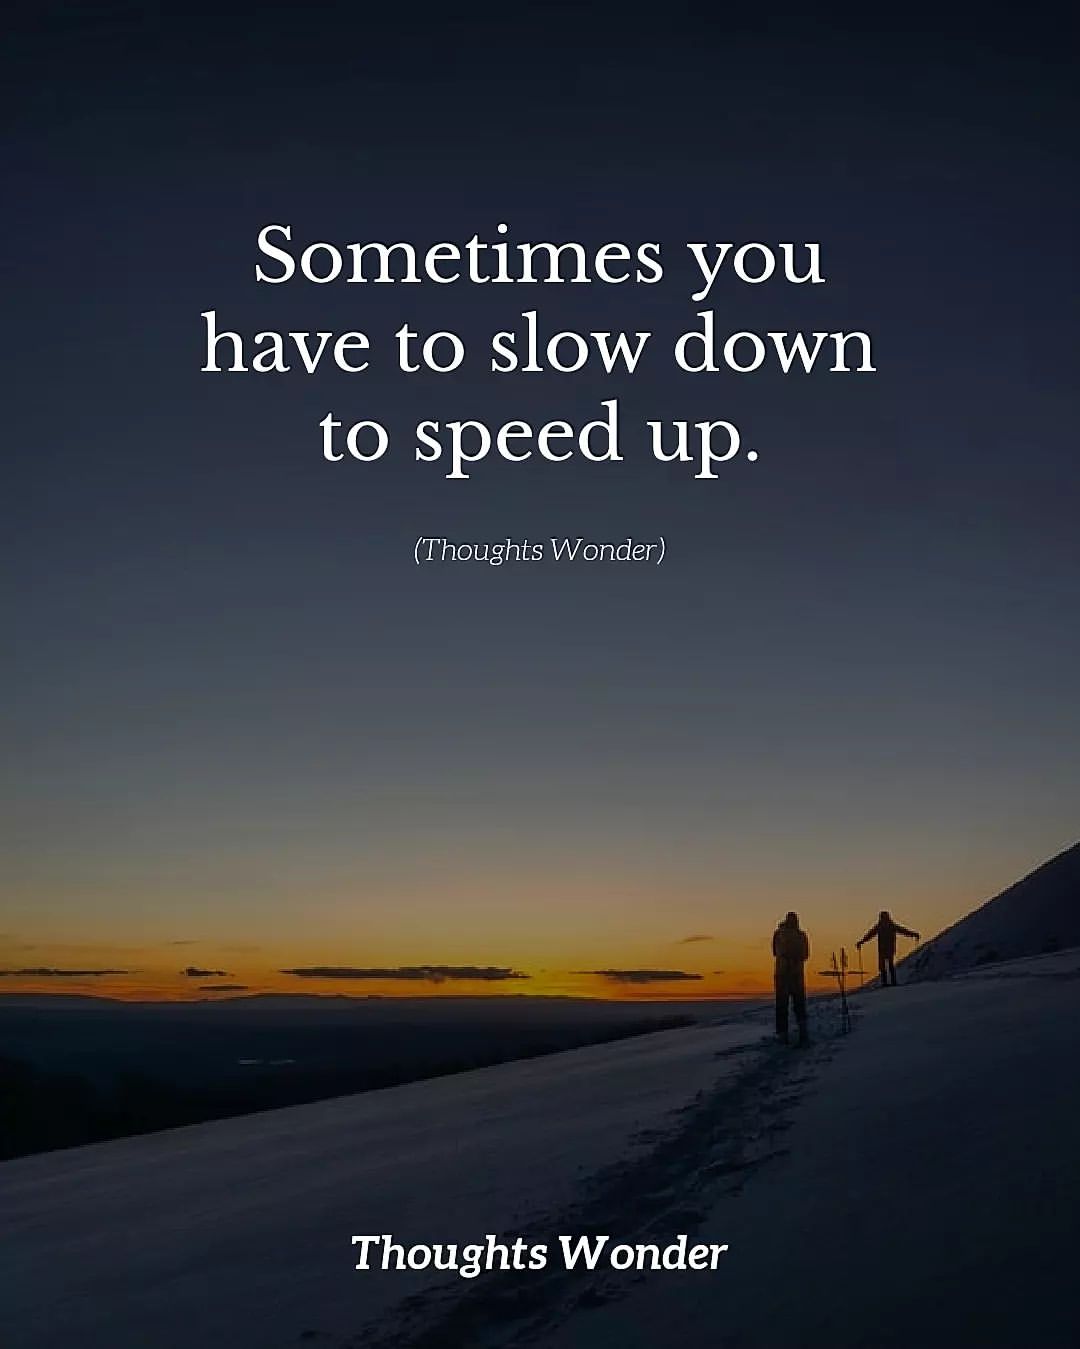 Sometimes you have to slow down to speed up. - Phrases